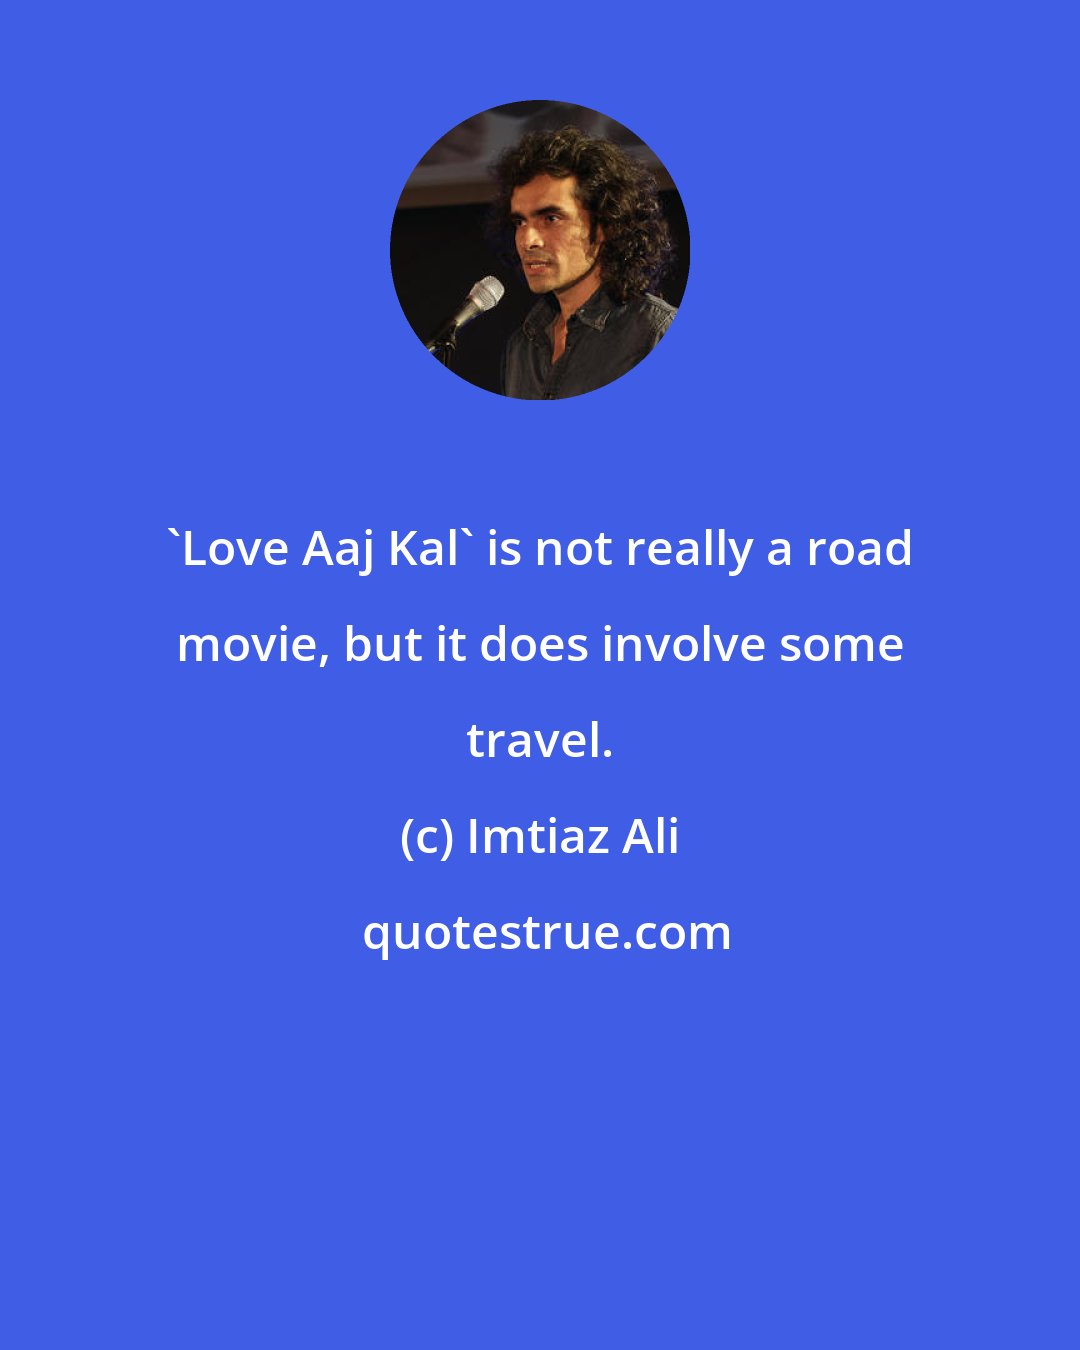 Imtiaz Ali: 'Love Aaj Kal' is not really a road movie, but it does involve some travel.